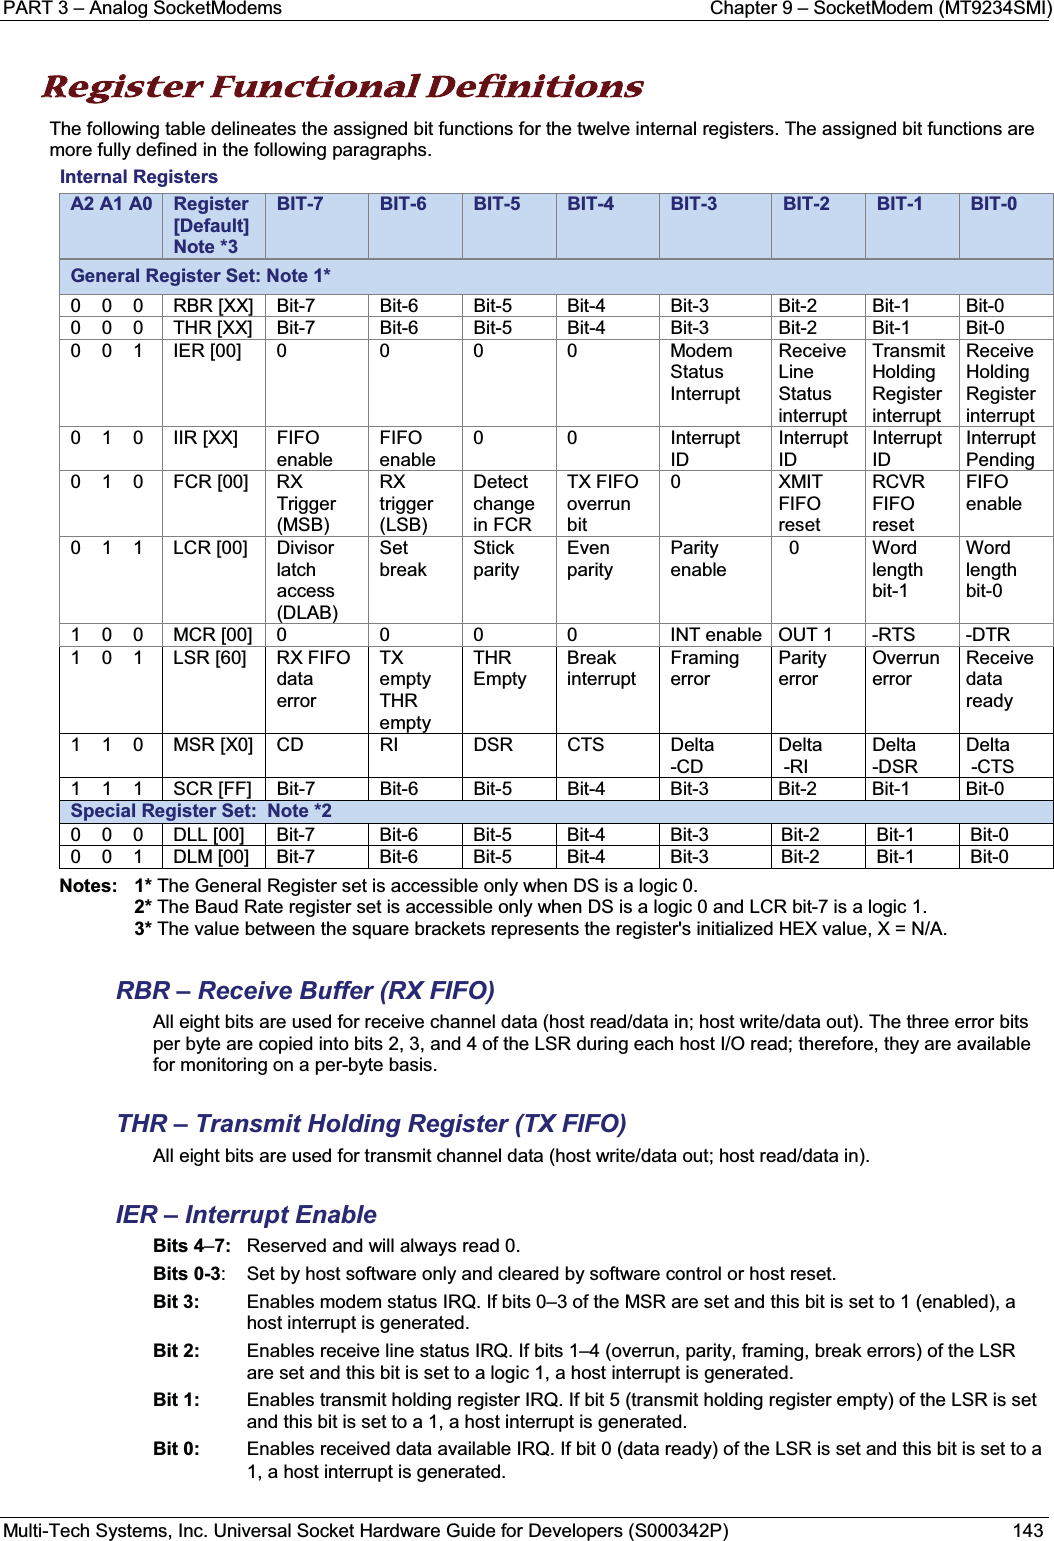 PART 3 – Analog SocketModems Chapter 9 – SocketModem (MT9234SMI)Multi-Tech Systems, Inc. Universal Socket Hardware Guide for Developers (S000342P) 143RRegister Functional Definitions The following table delineates the assigned bit functions for the twelve internal registers. The assigned bit functions are more fully defined in the following paragraphs.Internal RegistersA2 A1 A0 Register[Default]   Note *3BIT-7 BIT-6 BIT-5 BIT-4 BIT-3 BIT-2 BIT-1 BIT-0General Register Set: Note 1*0    0    0 RBR [XX] Bit-7 Bit-6 Bit-5 Bit-4 Bit-3 Bit-2 Bit-1 Bit-00    0    0 THR [XX] Bit-7 Bit-6 Bit-5 Bit-4 Bit-3 Bit-2 Bit-1 Bit-00    0    1 IER [00] 0 0 0 0 Modem Status InterruptReceive Line Status interruptTransmit Holding Register interruptReceive Holding Register interrupt0    1    0 IIR [XX] FIFO enable FIFO enable0 0 Interrupt IDInterrupt IDInterrupt IDInterrupt Pending0    1    0 FCR [00] RX Trigger (MSB)RX trigger (LSB)Detect change in FCRTX FIFO overrun bit0XMIT FIFO resetRCVR FIFO resetFIFO enable0    1    1 LCR [00] Divisor latch access(DLAB)Set breakStick parityEven parity Parity enable0Word length bit-1Word length bit-01    0    0 MCR [00] 0 0 0 0 INT enable OUT 1 -RTS -DTR1    0    1 LSR [60] RX FIFO data errorTX empty THR emptyTHR EmptyBreak interruptFraming errorParity errorOverrun errorReceive data ready1    1    0 MSR [X0] CD RI DSR CTS Delta -CDDelta-RIDelta -DSRDelta-CTS1    1    1 SCR [FF] Bit-7 Bit-6 Bit-5 Bit-4 Bit-3 Bit-2 Bit-1 Bit-0Special Register Set:  Note *20    0    0 DLL [00] Bit-7 Bit-6 Bit-5 Bit-4 Bit-3 Bit-2 Bit-1 Bit-00    0    1 DLM [00] Bit-7 Bit-6 Bit-5 Bit-4 Bit-3 Bit-2 Bit-1 Bit-0Notes: 1* The General Register set is accessible only when DS is a logic 0.2* The Baud Rate register set is accessible only when DS is a logic 0 and LCR bit-7 is a logic 1.3* The value between the square brackets represents the register&apos;s initialized HEX value, X = N/A.RBR – Receive Buffer (RX FIFO)All eight bits are used for receive channel data (host read/data in; host write/data out). The three error bits per byte are copied into bits 2, 3, and 4 of the LSR during each host I/O read; therefore, they are available for monitoring on a per-byte basis.THR – Transmit Holding Register (TX FIFO)All eight bits are used for transmit channel data (host write/data out; host read/data in).IER – Interrupt EnableBits 4–7:  Reserved and will always read 0.Bits 0-3: Set by host software only and cleared by software control or host reset.Bit 3: Enables modem status IRQ. If bits 0–3 of the MSR are set and this bit is set to 1 (enabled), a host interrupt is generated.Bit 2: Enables receive line status IRQ. If bits 1–4 (overrun, parity, framing, break errors) of the LSR are set and this bit is set to a logic 1, a host interrupt is generated.Bit 1: Enables transmit holding register IRQ. If bit 5 (transmit holding register empty) of the LSR is set and this bit is set to a 1, a host interrupt is generated.Bit 0: Enables received data available IRQ. If bit 0 (data ready) of the LSR is set and this bit is set to a 1, a host interrupt is generated.